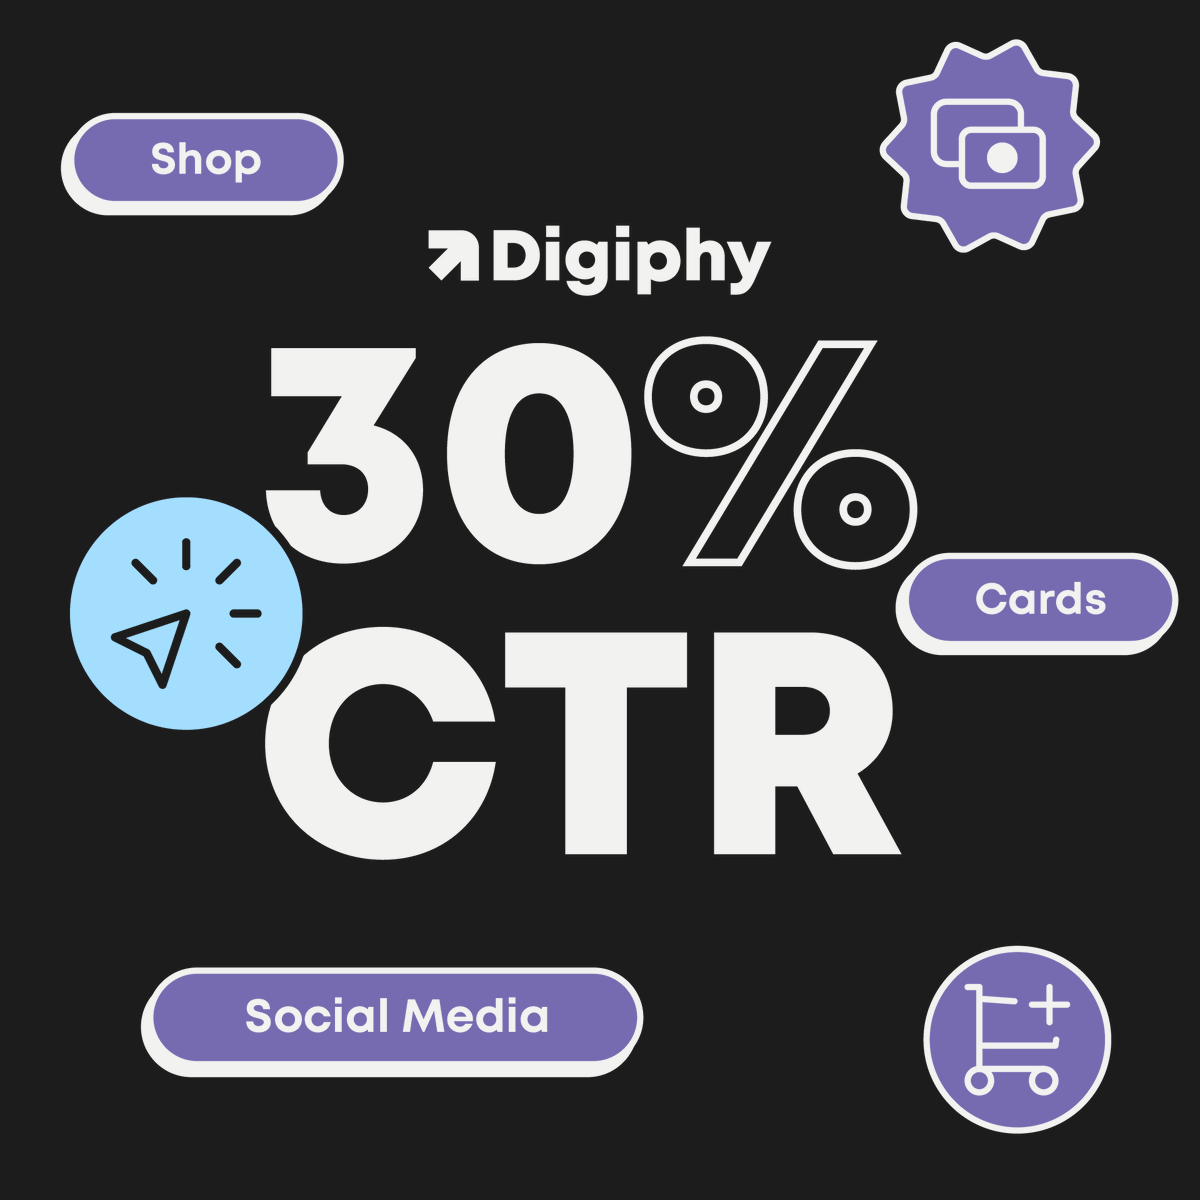 Digiphy’s QR + Storylines creates a new marketing channel that helped our partner, Musee Bath, see a 30% CTR on their digital business card, online shop, and social media channels. 

Full story: hubs.li/Q01MVhlr0
#QRmarketing #eventactivation #nocode #QR #casestudy